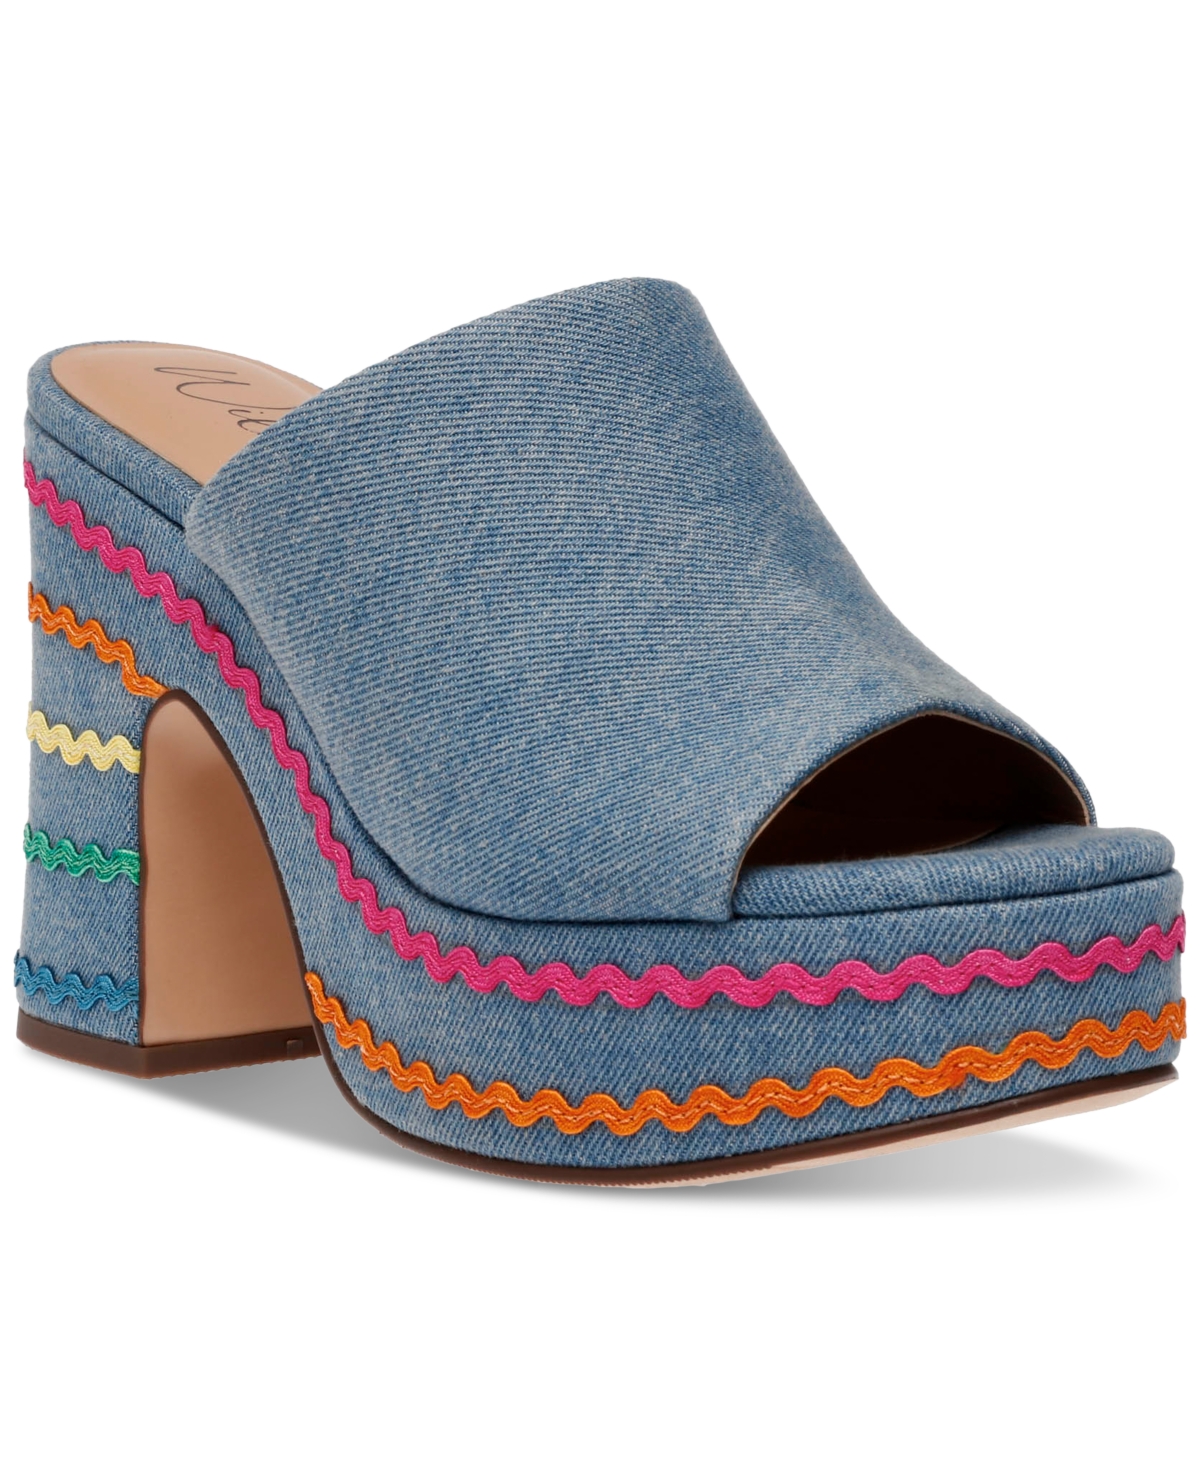 Wild Pair Rosaly Platform Wedge Sandals, Created For Macy's In Denim Multi